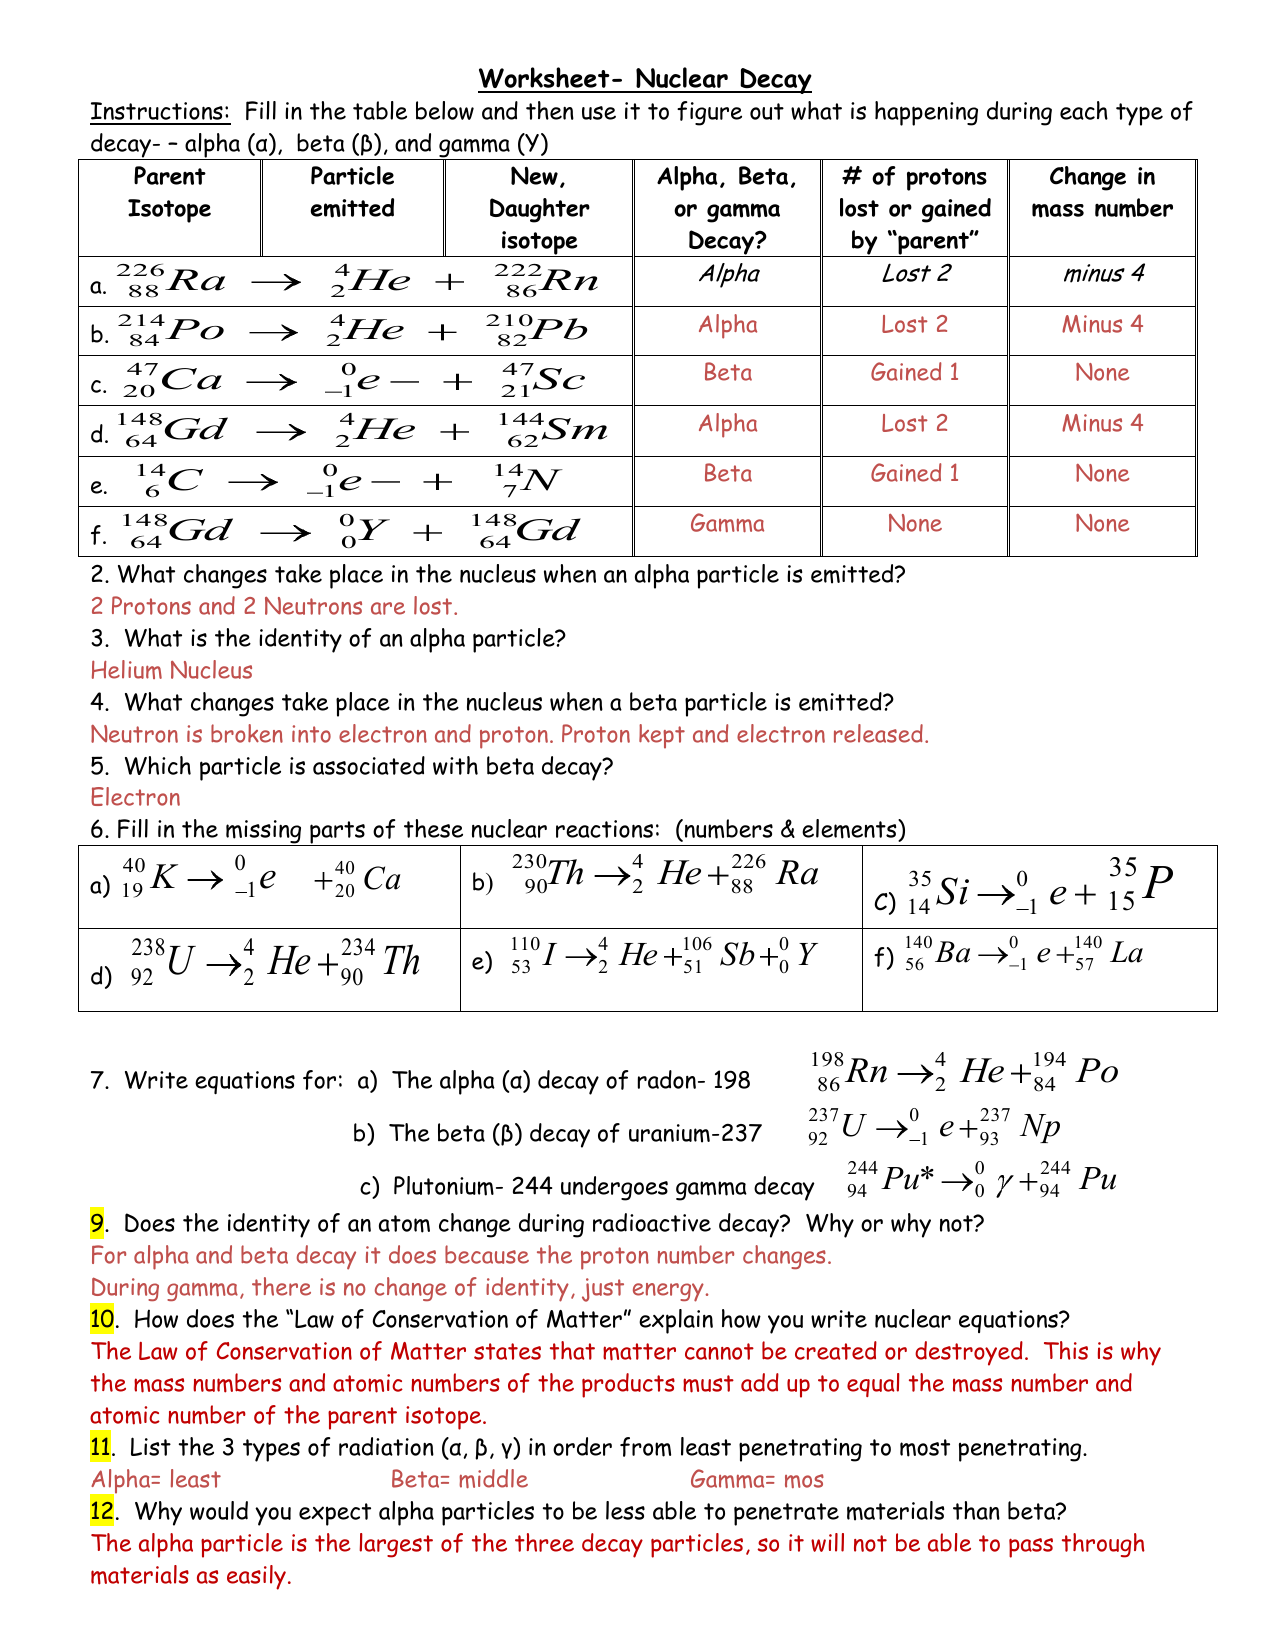 Worksheet- Nuclear Decay Intended For Nuclear Decay Worksheet Answers